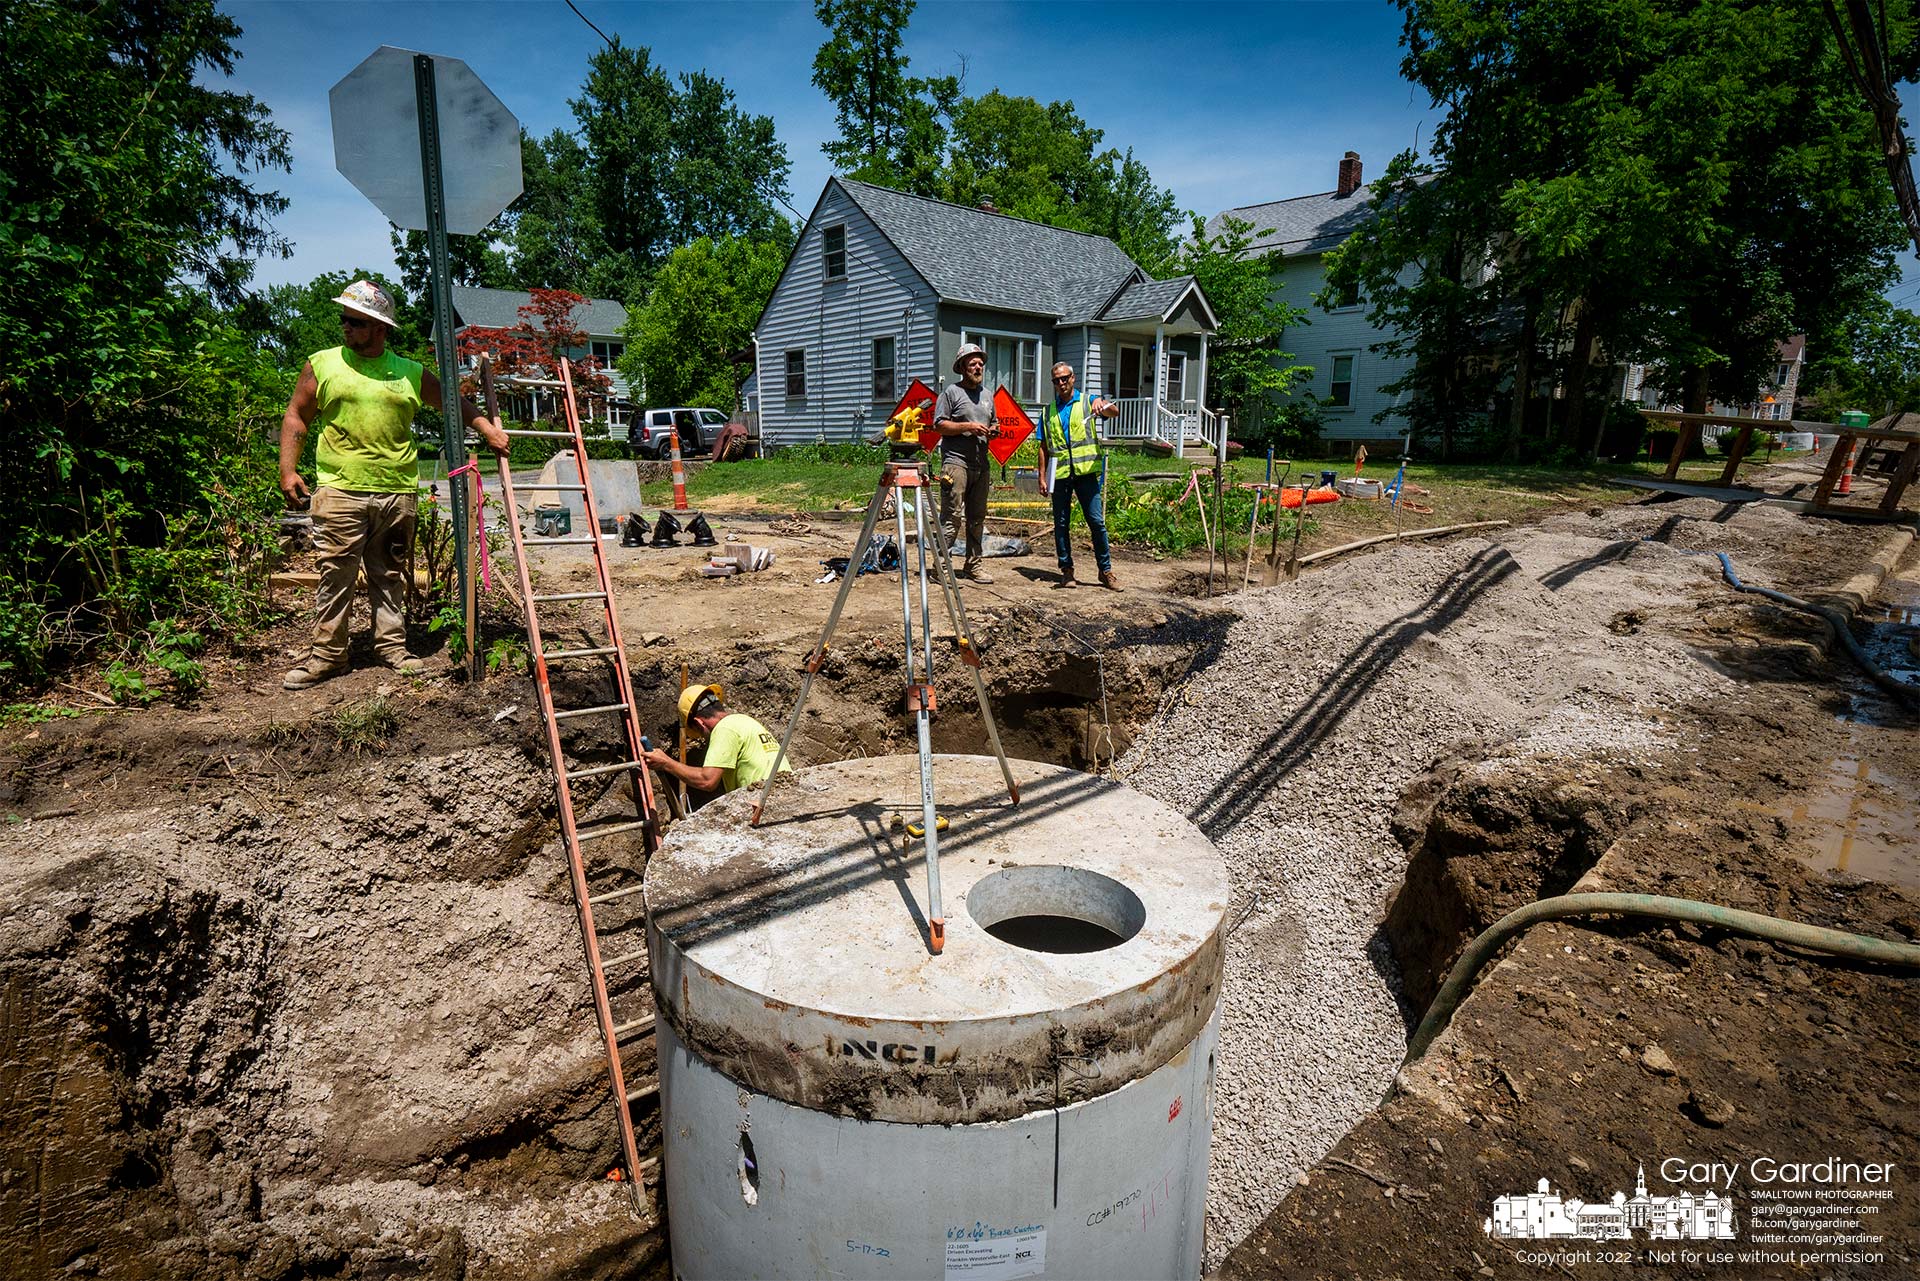 Workers and a city planner check over the installation of a new storm drain manhole near water mains on East College where utility construction has interrupted traffic and access to parts of the area. My Final Photo for July 7, 2022.